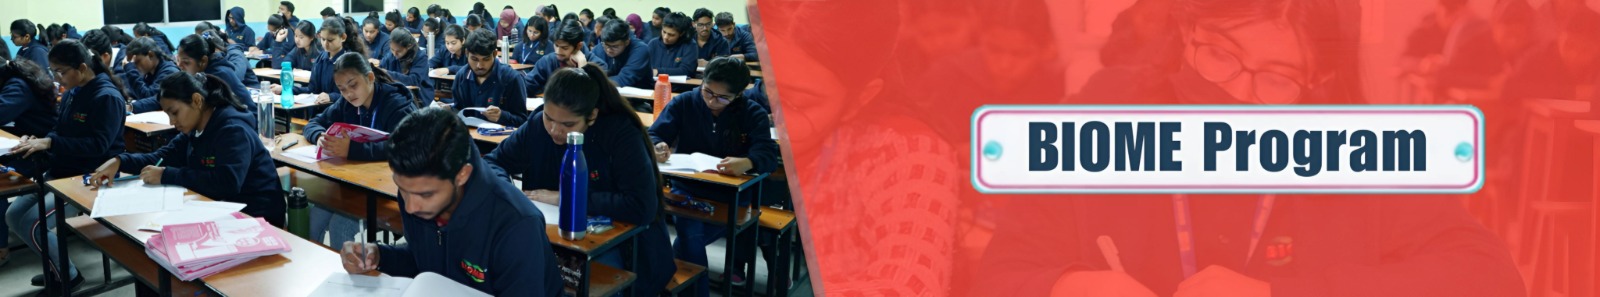 Regular Classroom Course For XI to XII Moving Students